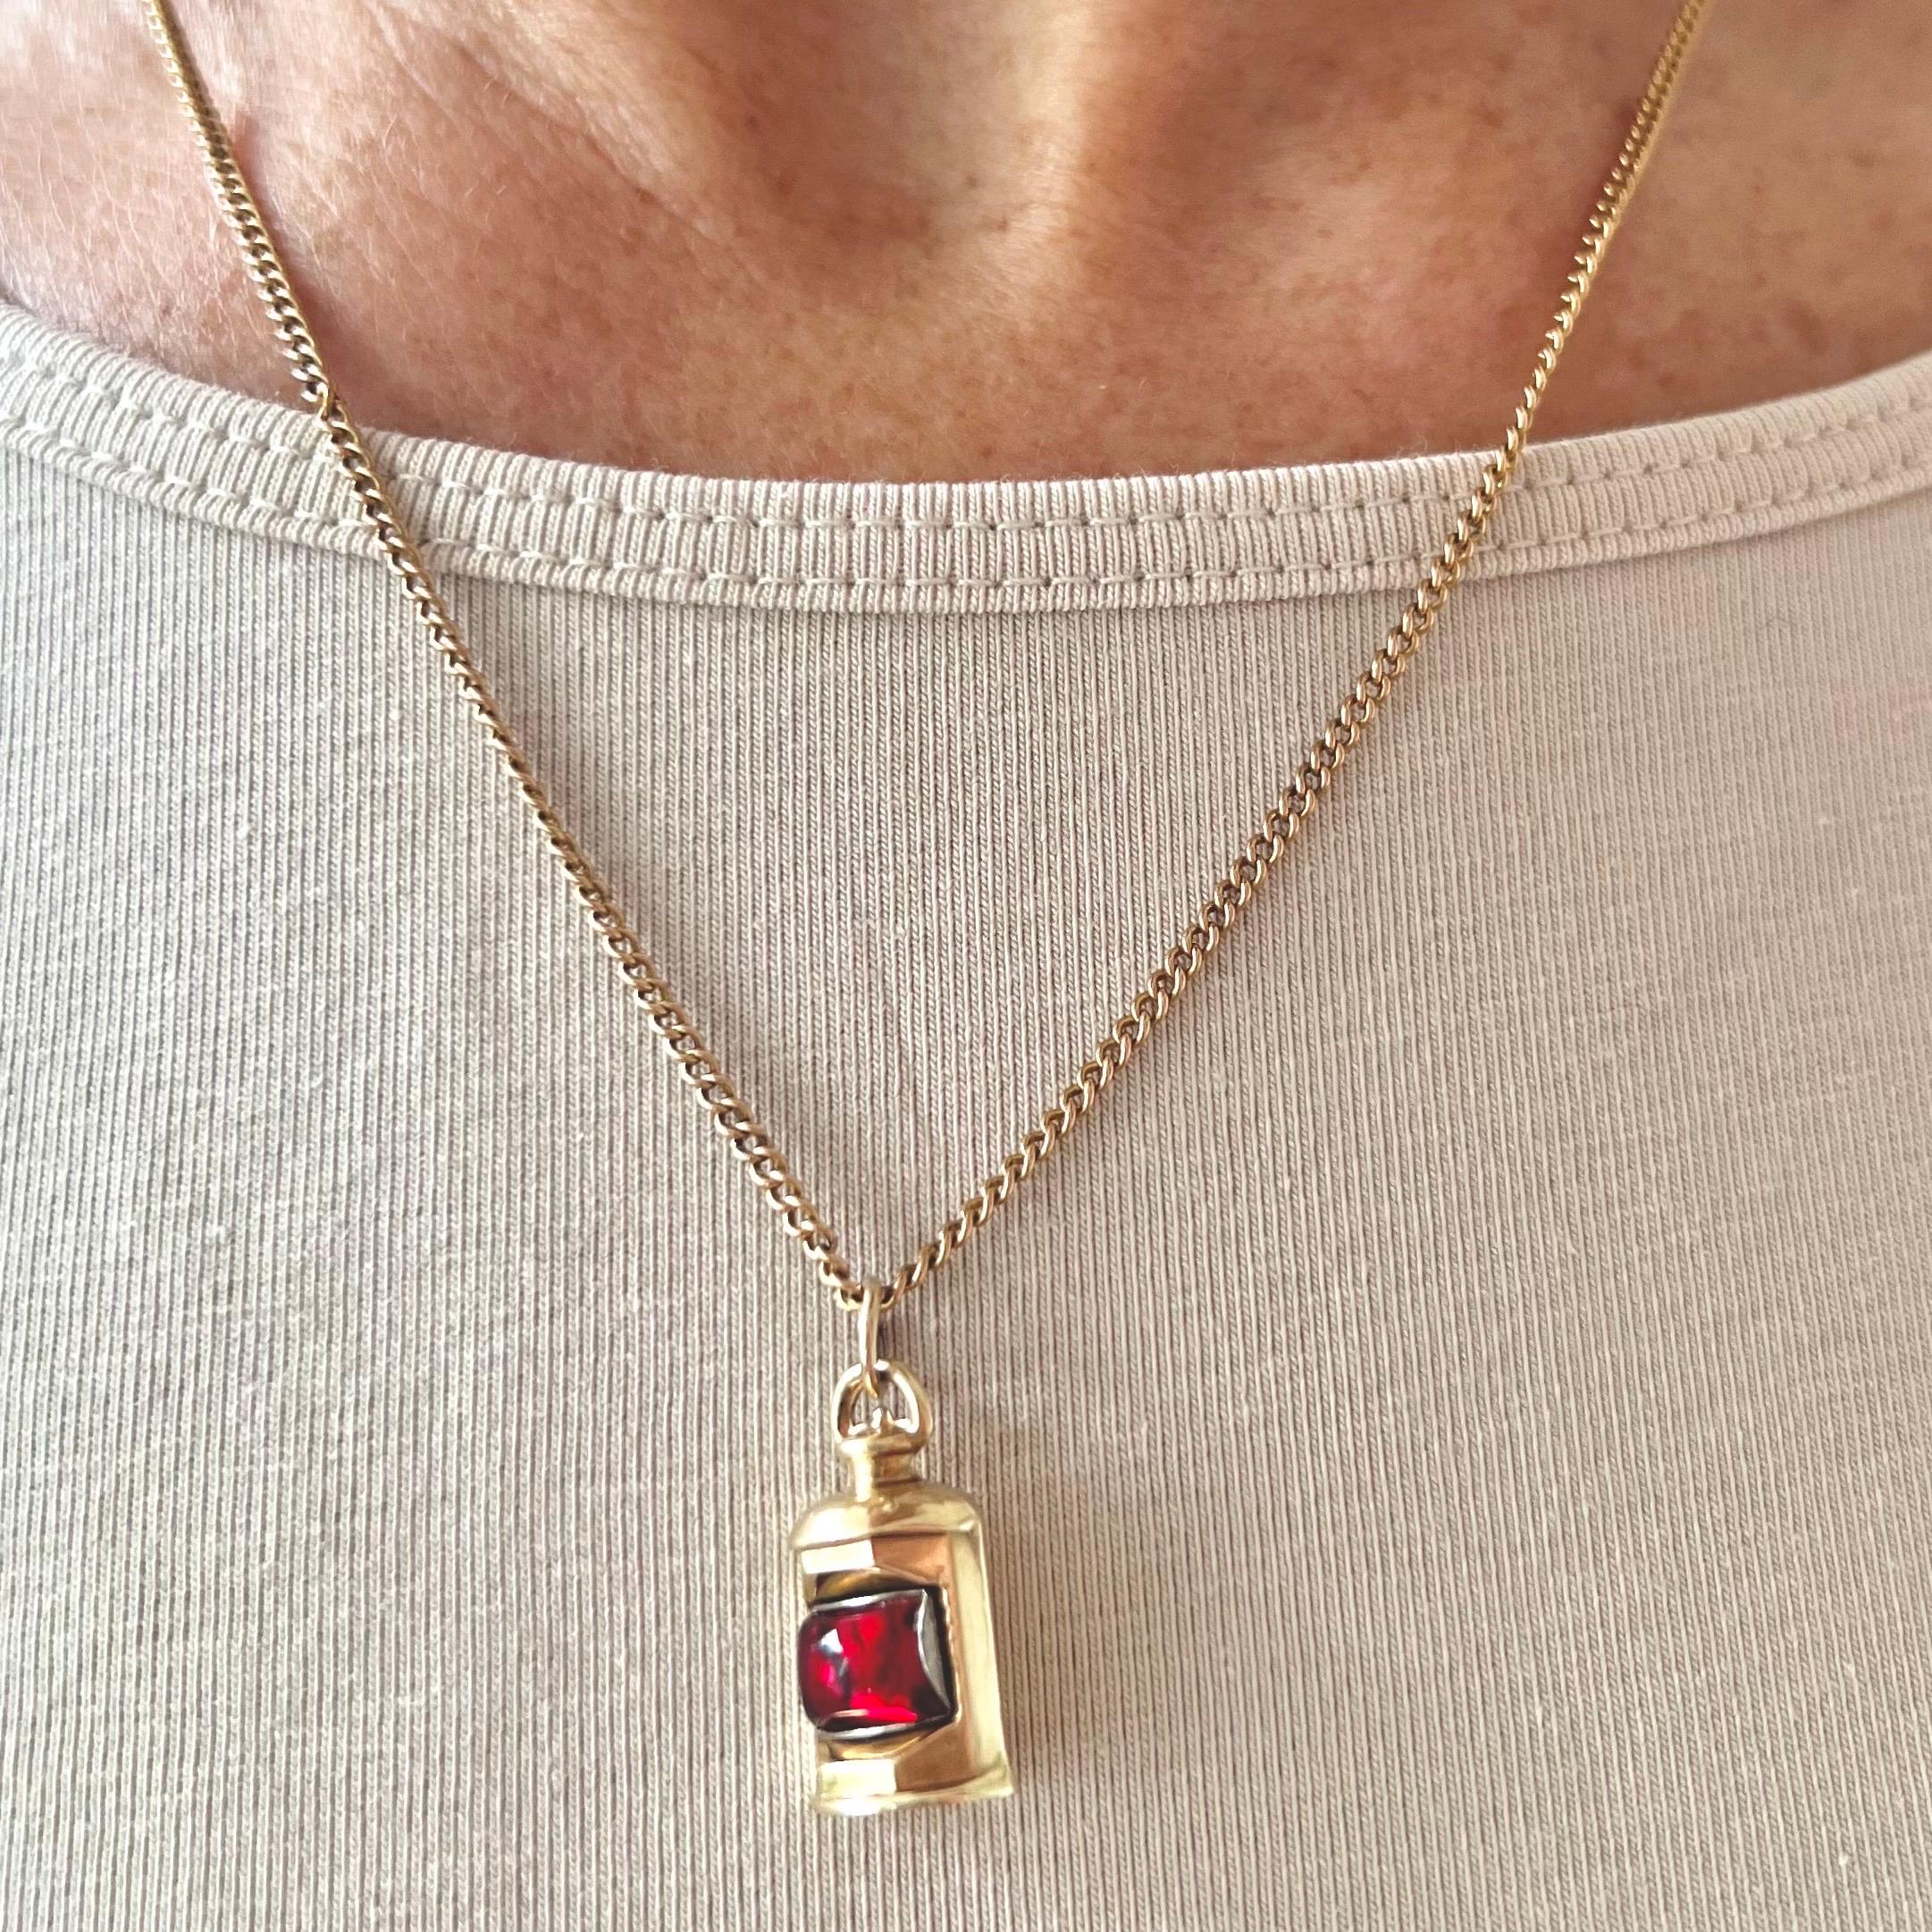 A vintage 9 karat yellow gold lantern charm pendant. The lantern is beautifully detailed and the is set with a red glass in the center which indicates the lit fuse of the lantern.

Collect your own charms as wearable memories, it has a symbolic and